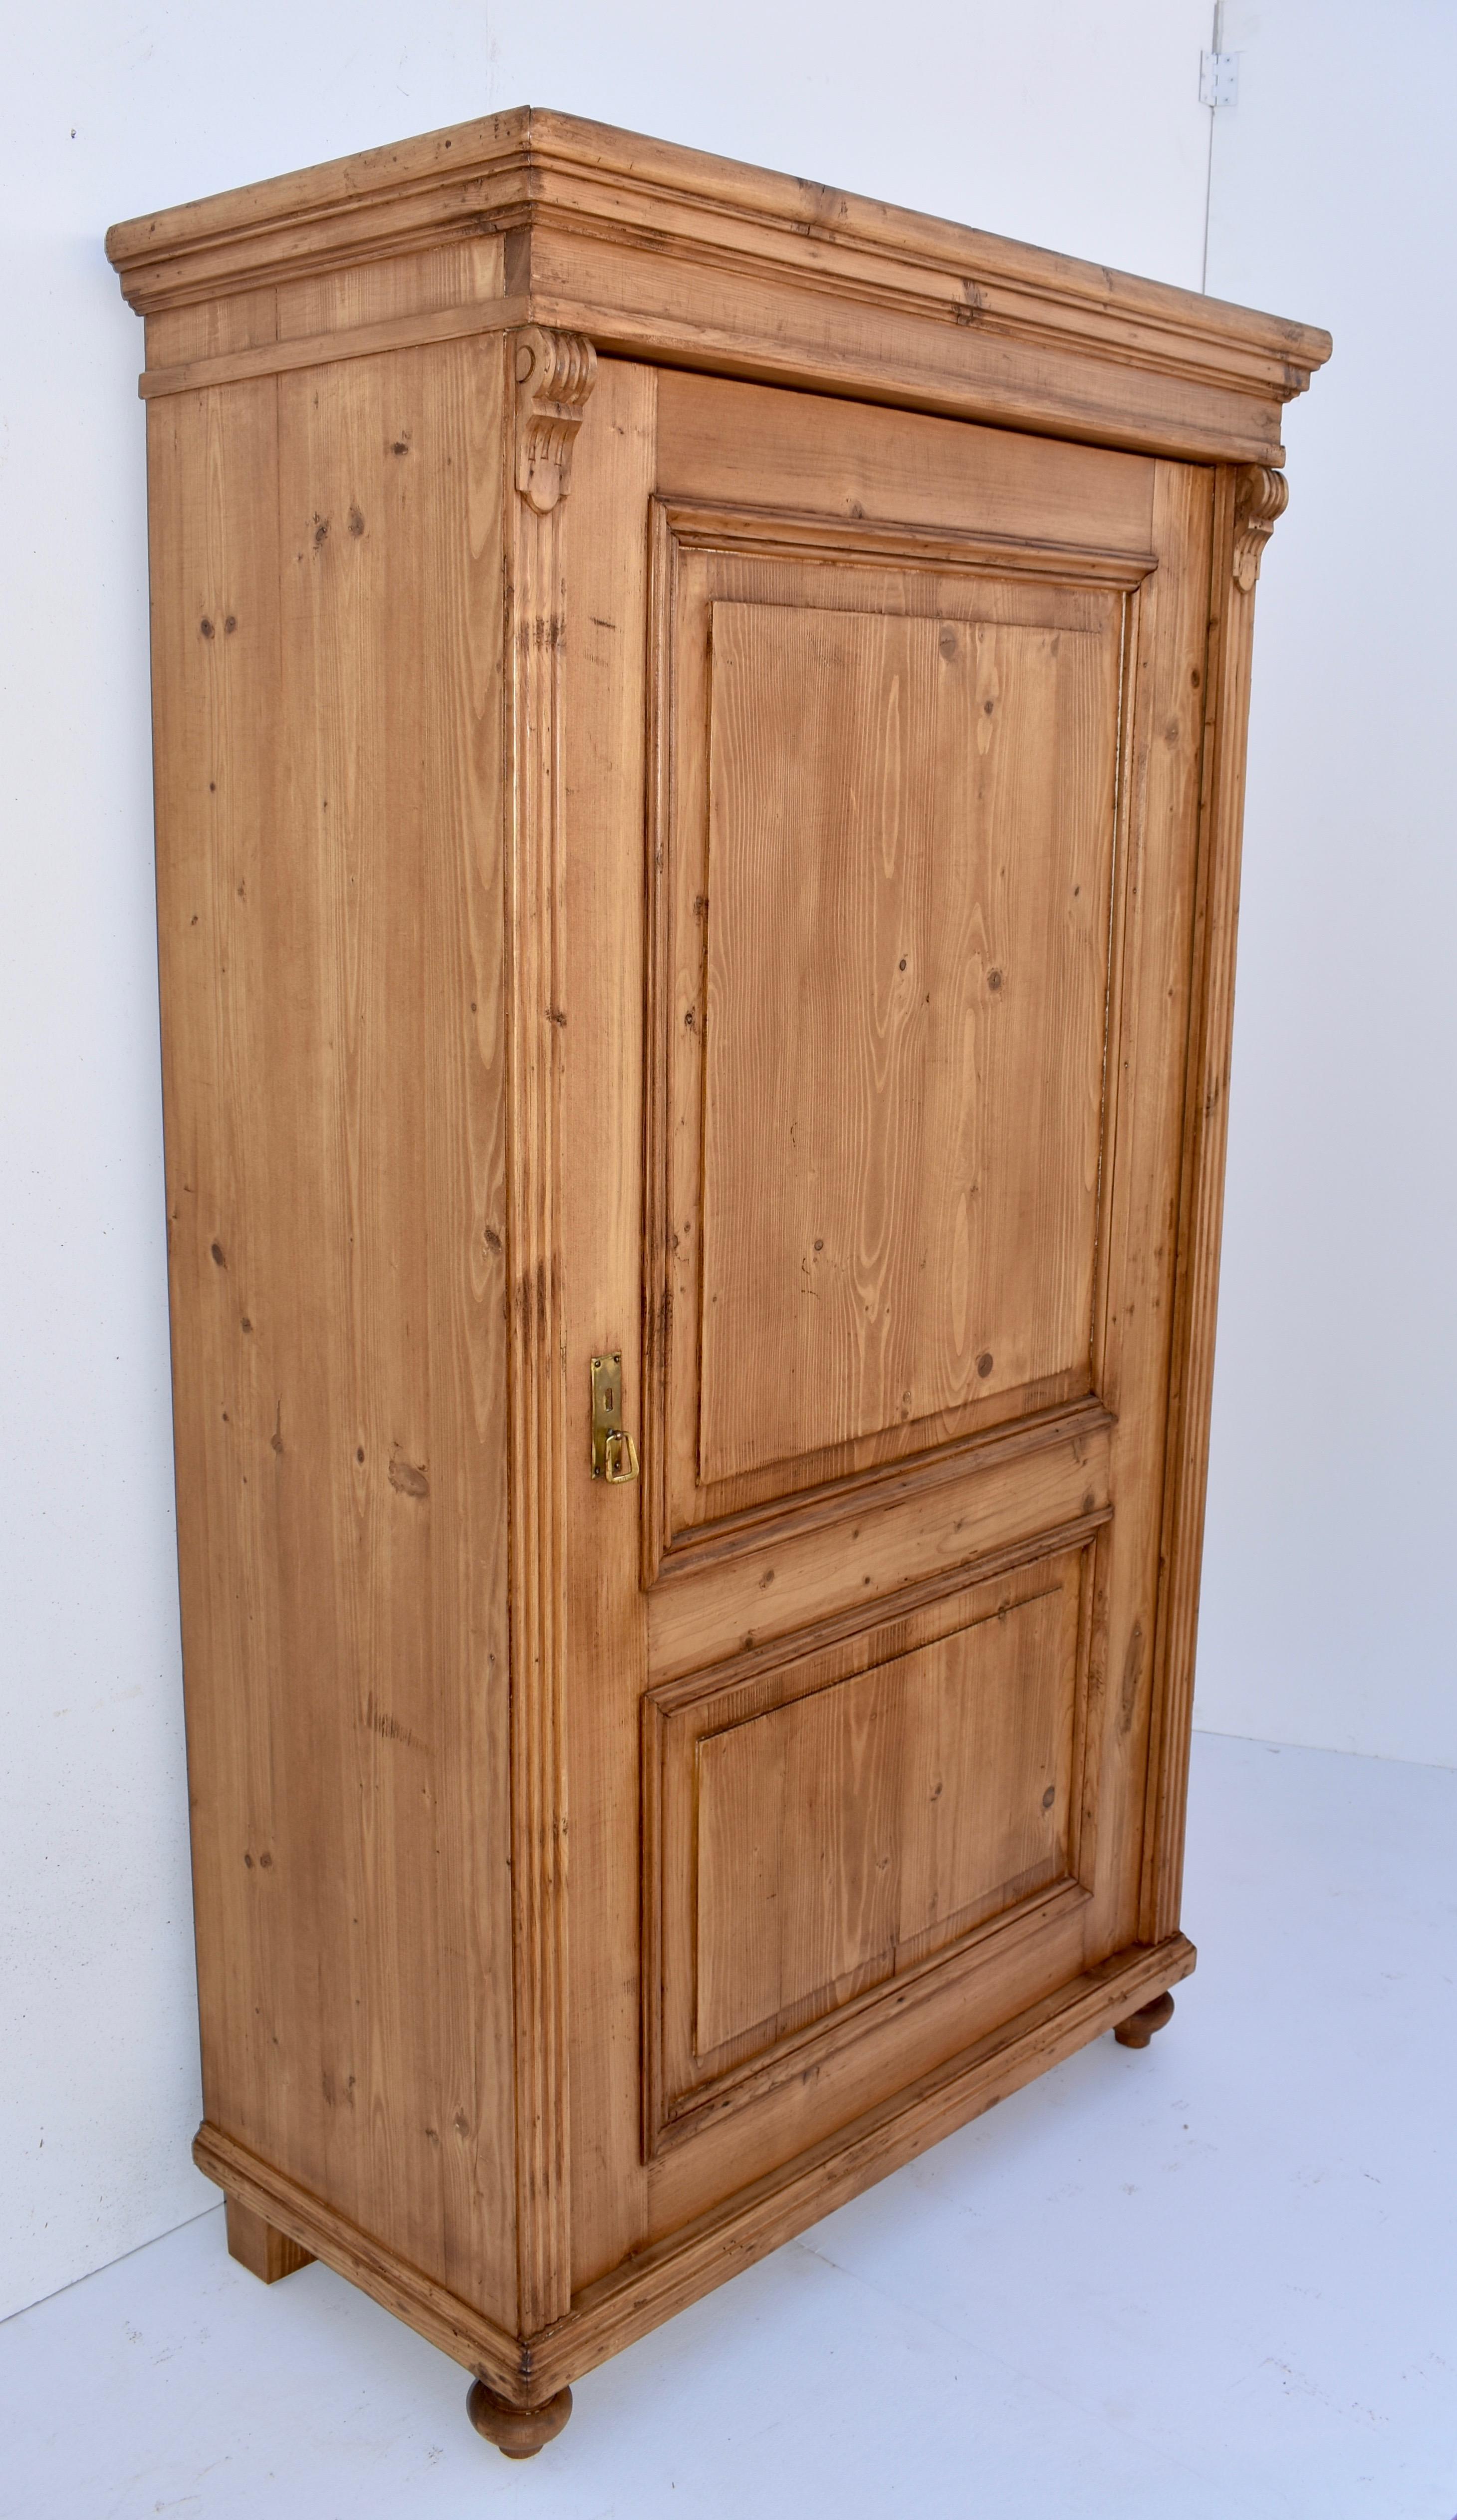 A plain and simple one door wardrobe, this piece has a bold crown molding, a door with two assymetrical raised panels and fluted front corners with carved corbels.